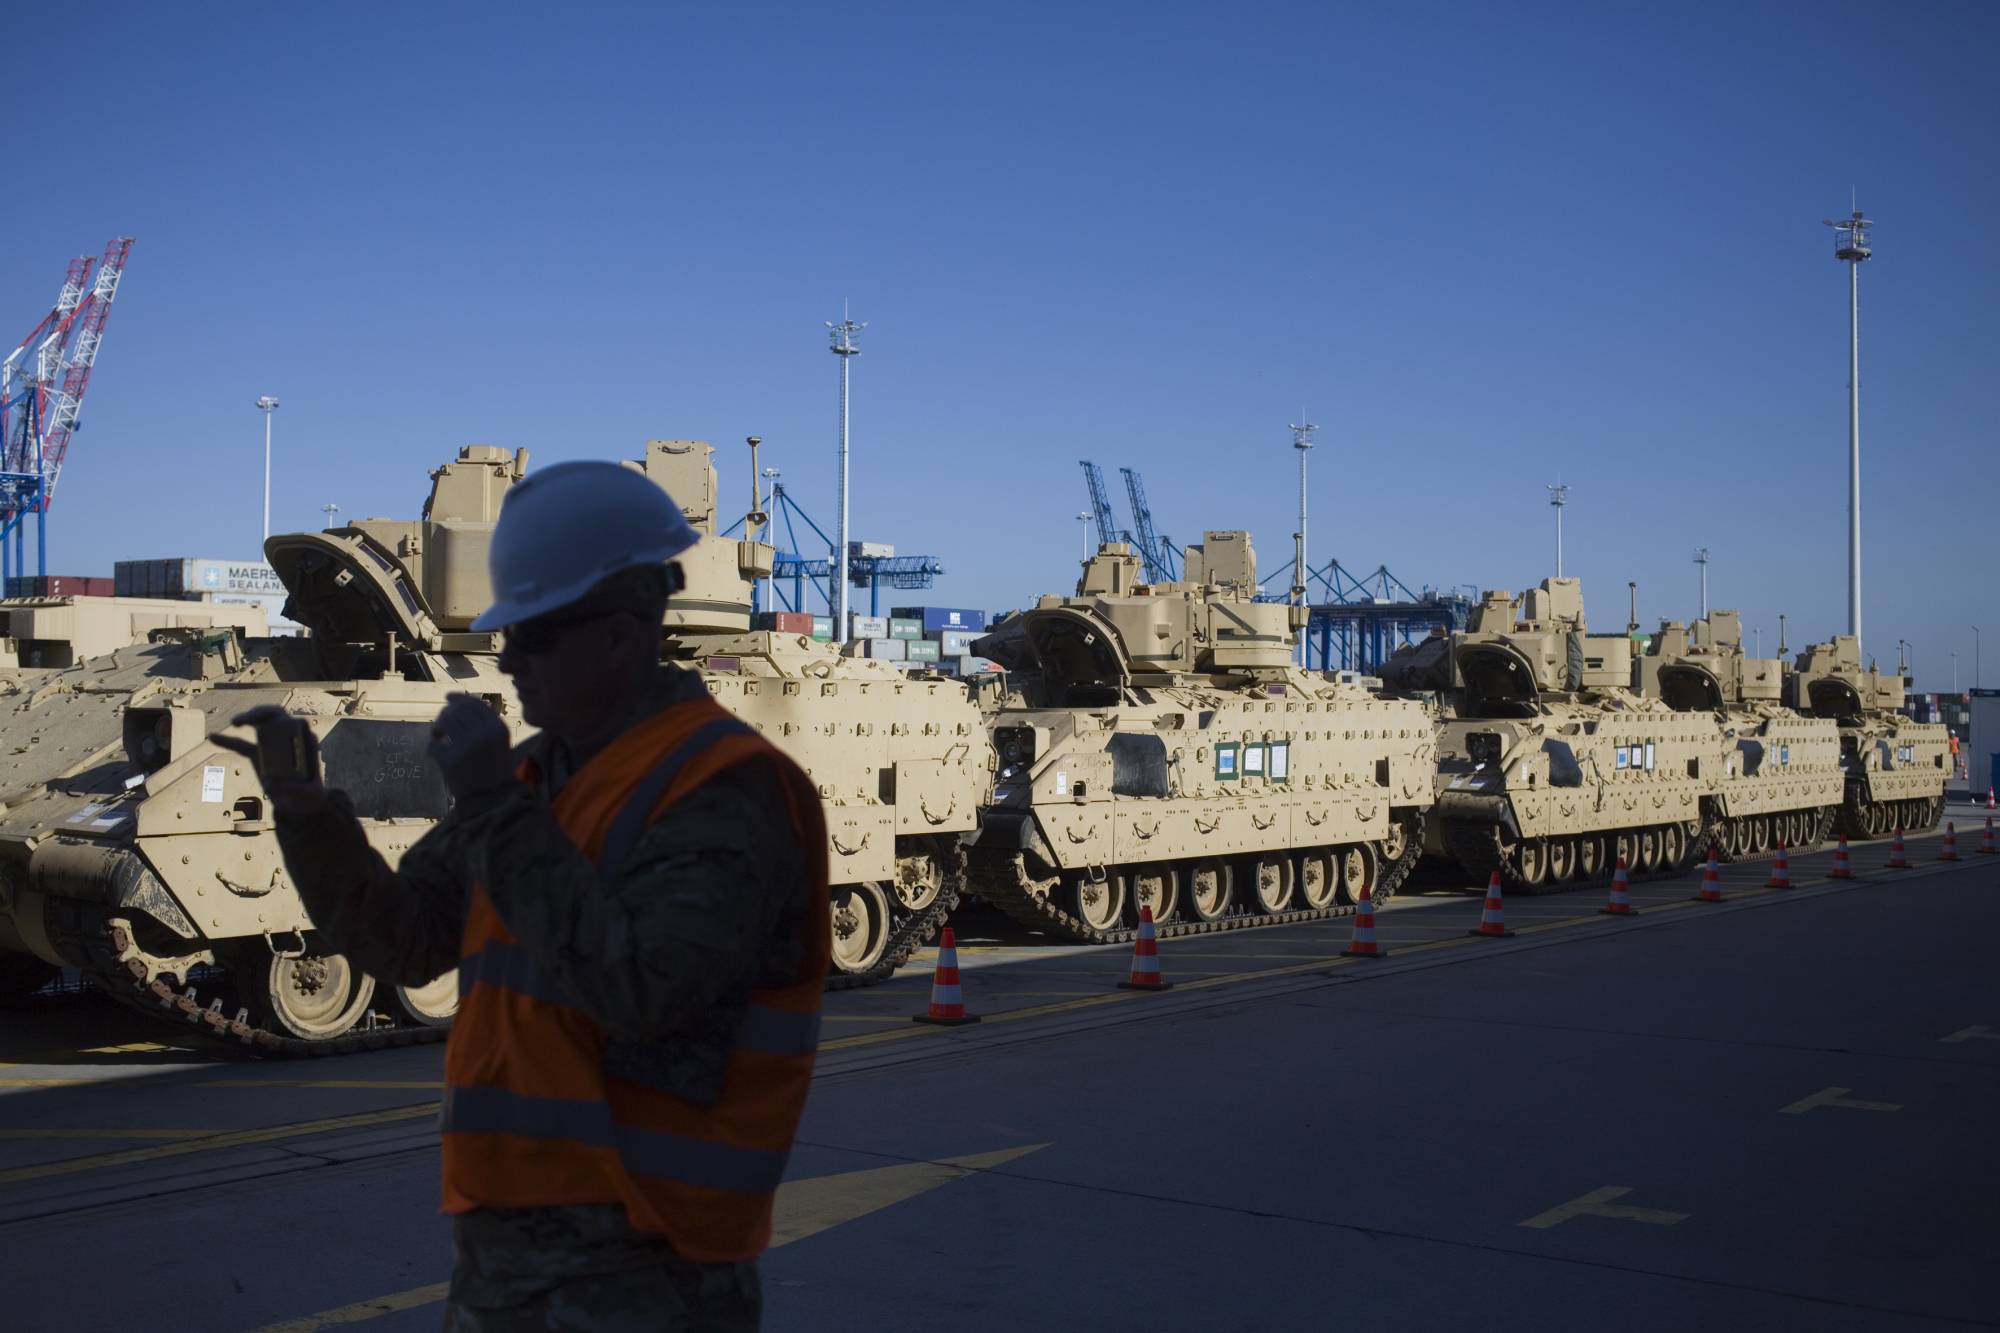 U.S. Army military vehicles stand after unloading in the port in Gdansk, Poland, Wednesday, Sept. 13, 2017. The equipment supply is a second heel-to-toe deployment of U.S. troops to the nation that is concerned for its security due to neighboring Russia's military activity. (AP Photo/Krzysztof Mystkowski)